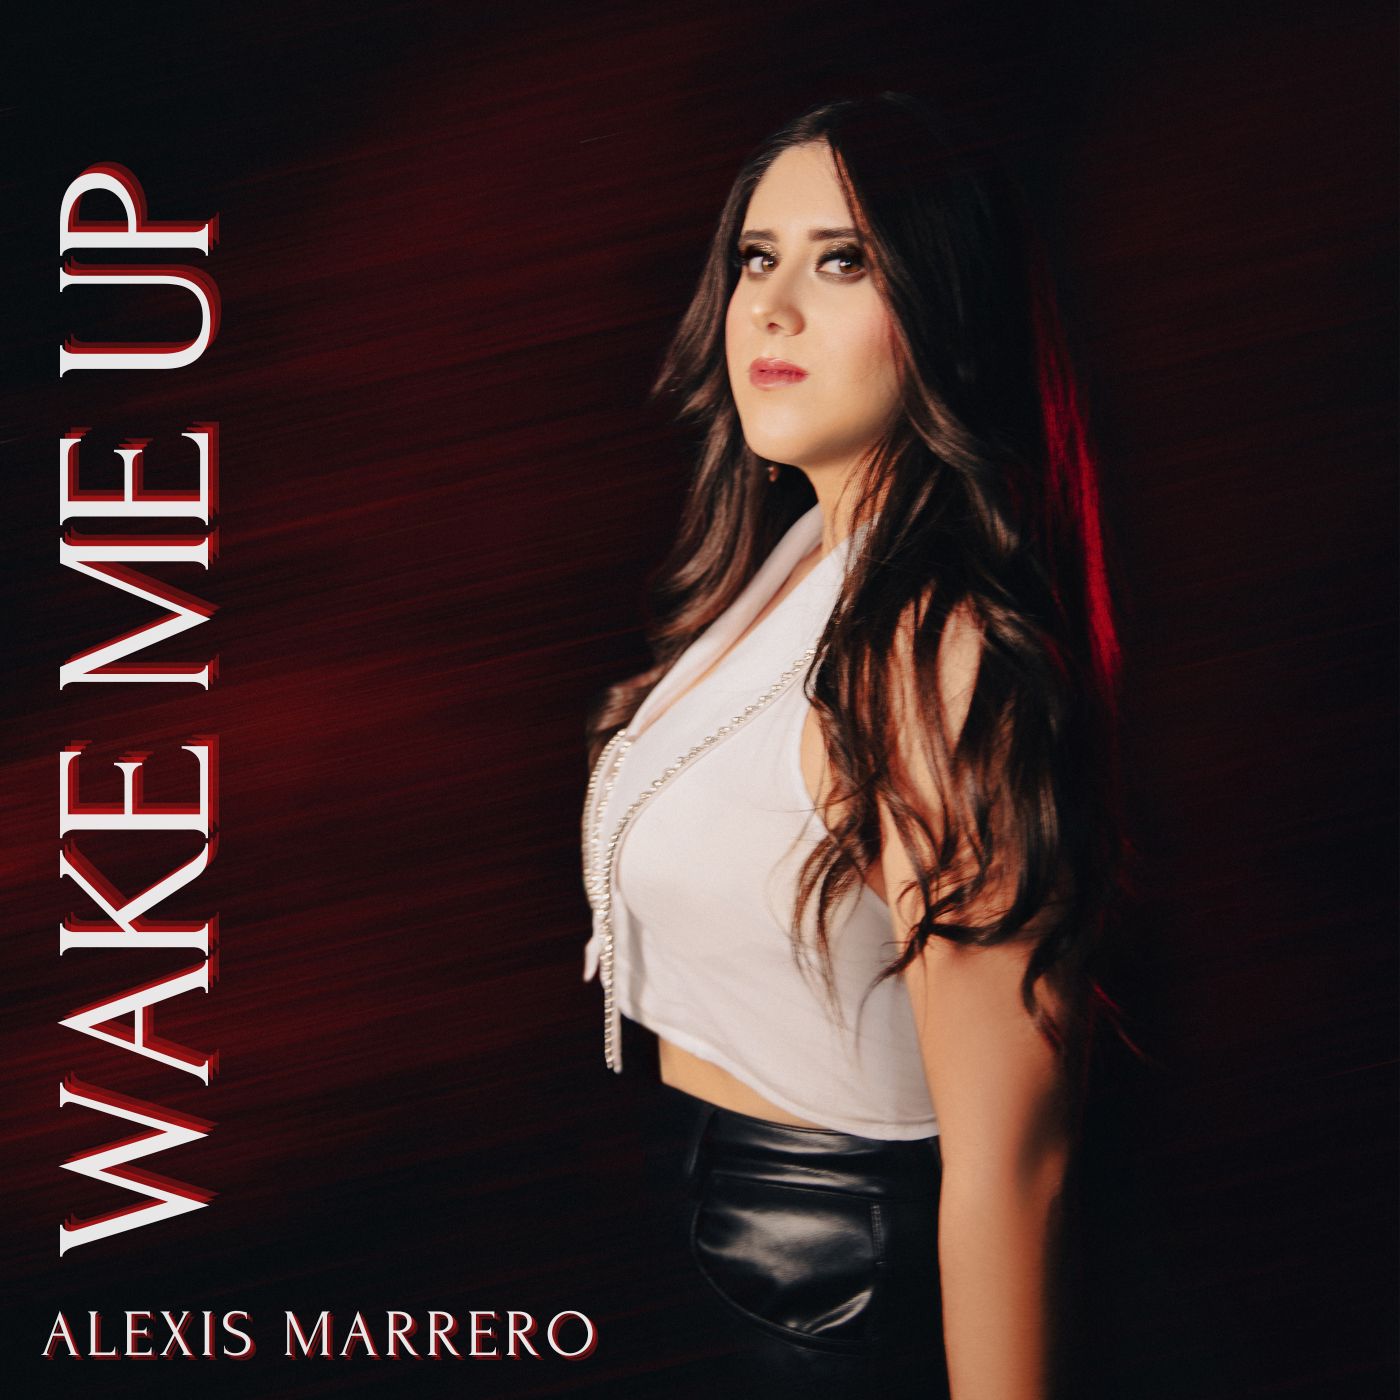 Alexis Marrero Releases Highly Anticipated "Wake Me Up" Music Video